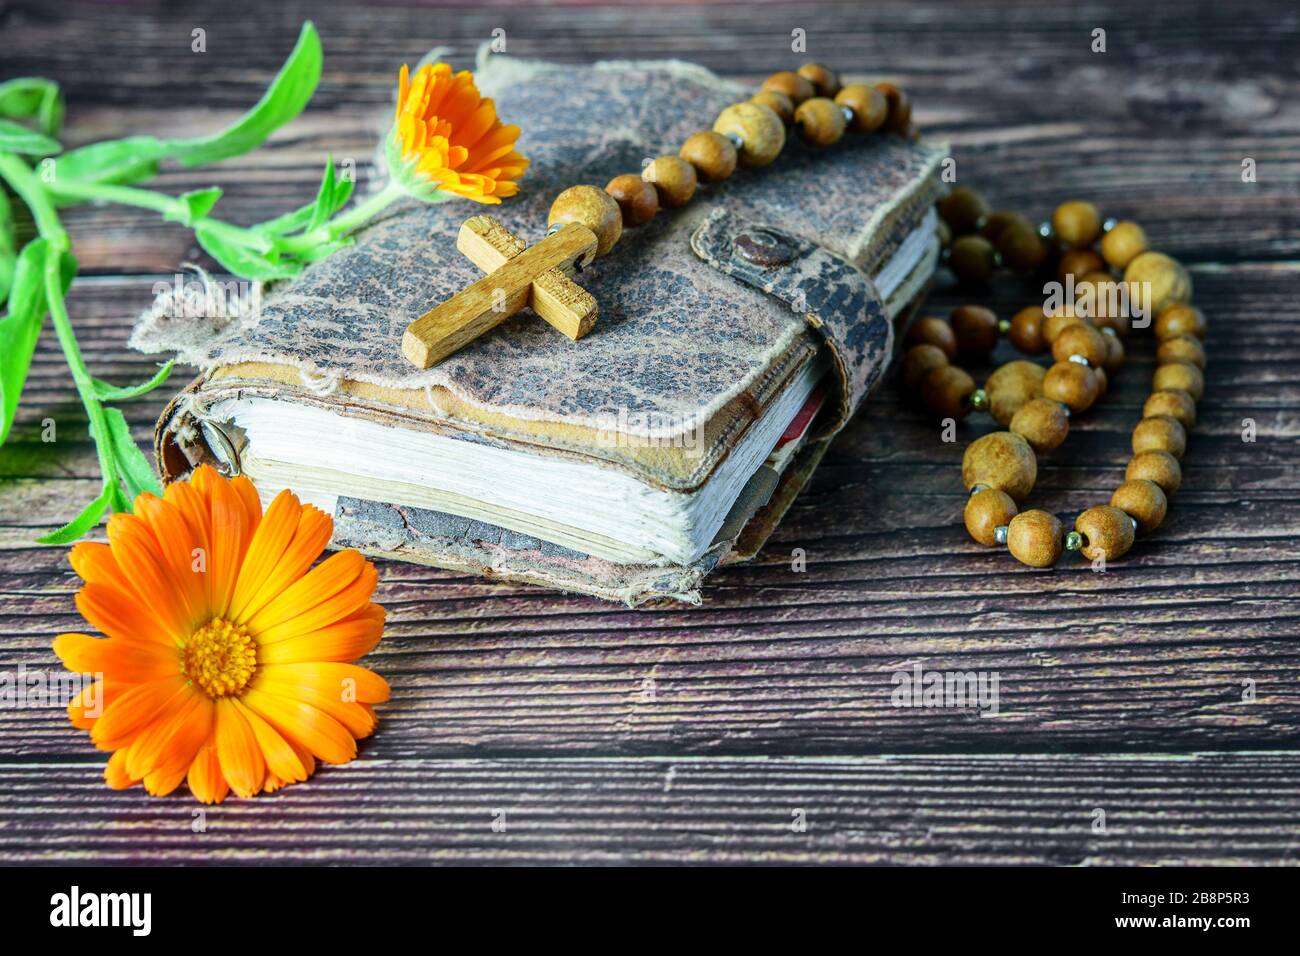 Wooden cross with chaplet on the ancient bible and a flower on the wooden background. Christian religion. We trust in god. Stock Photo